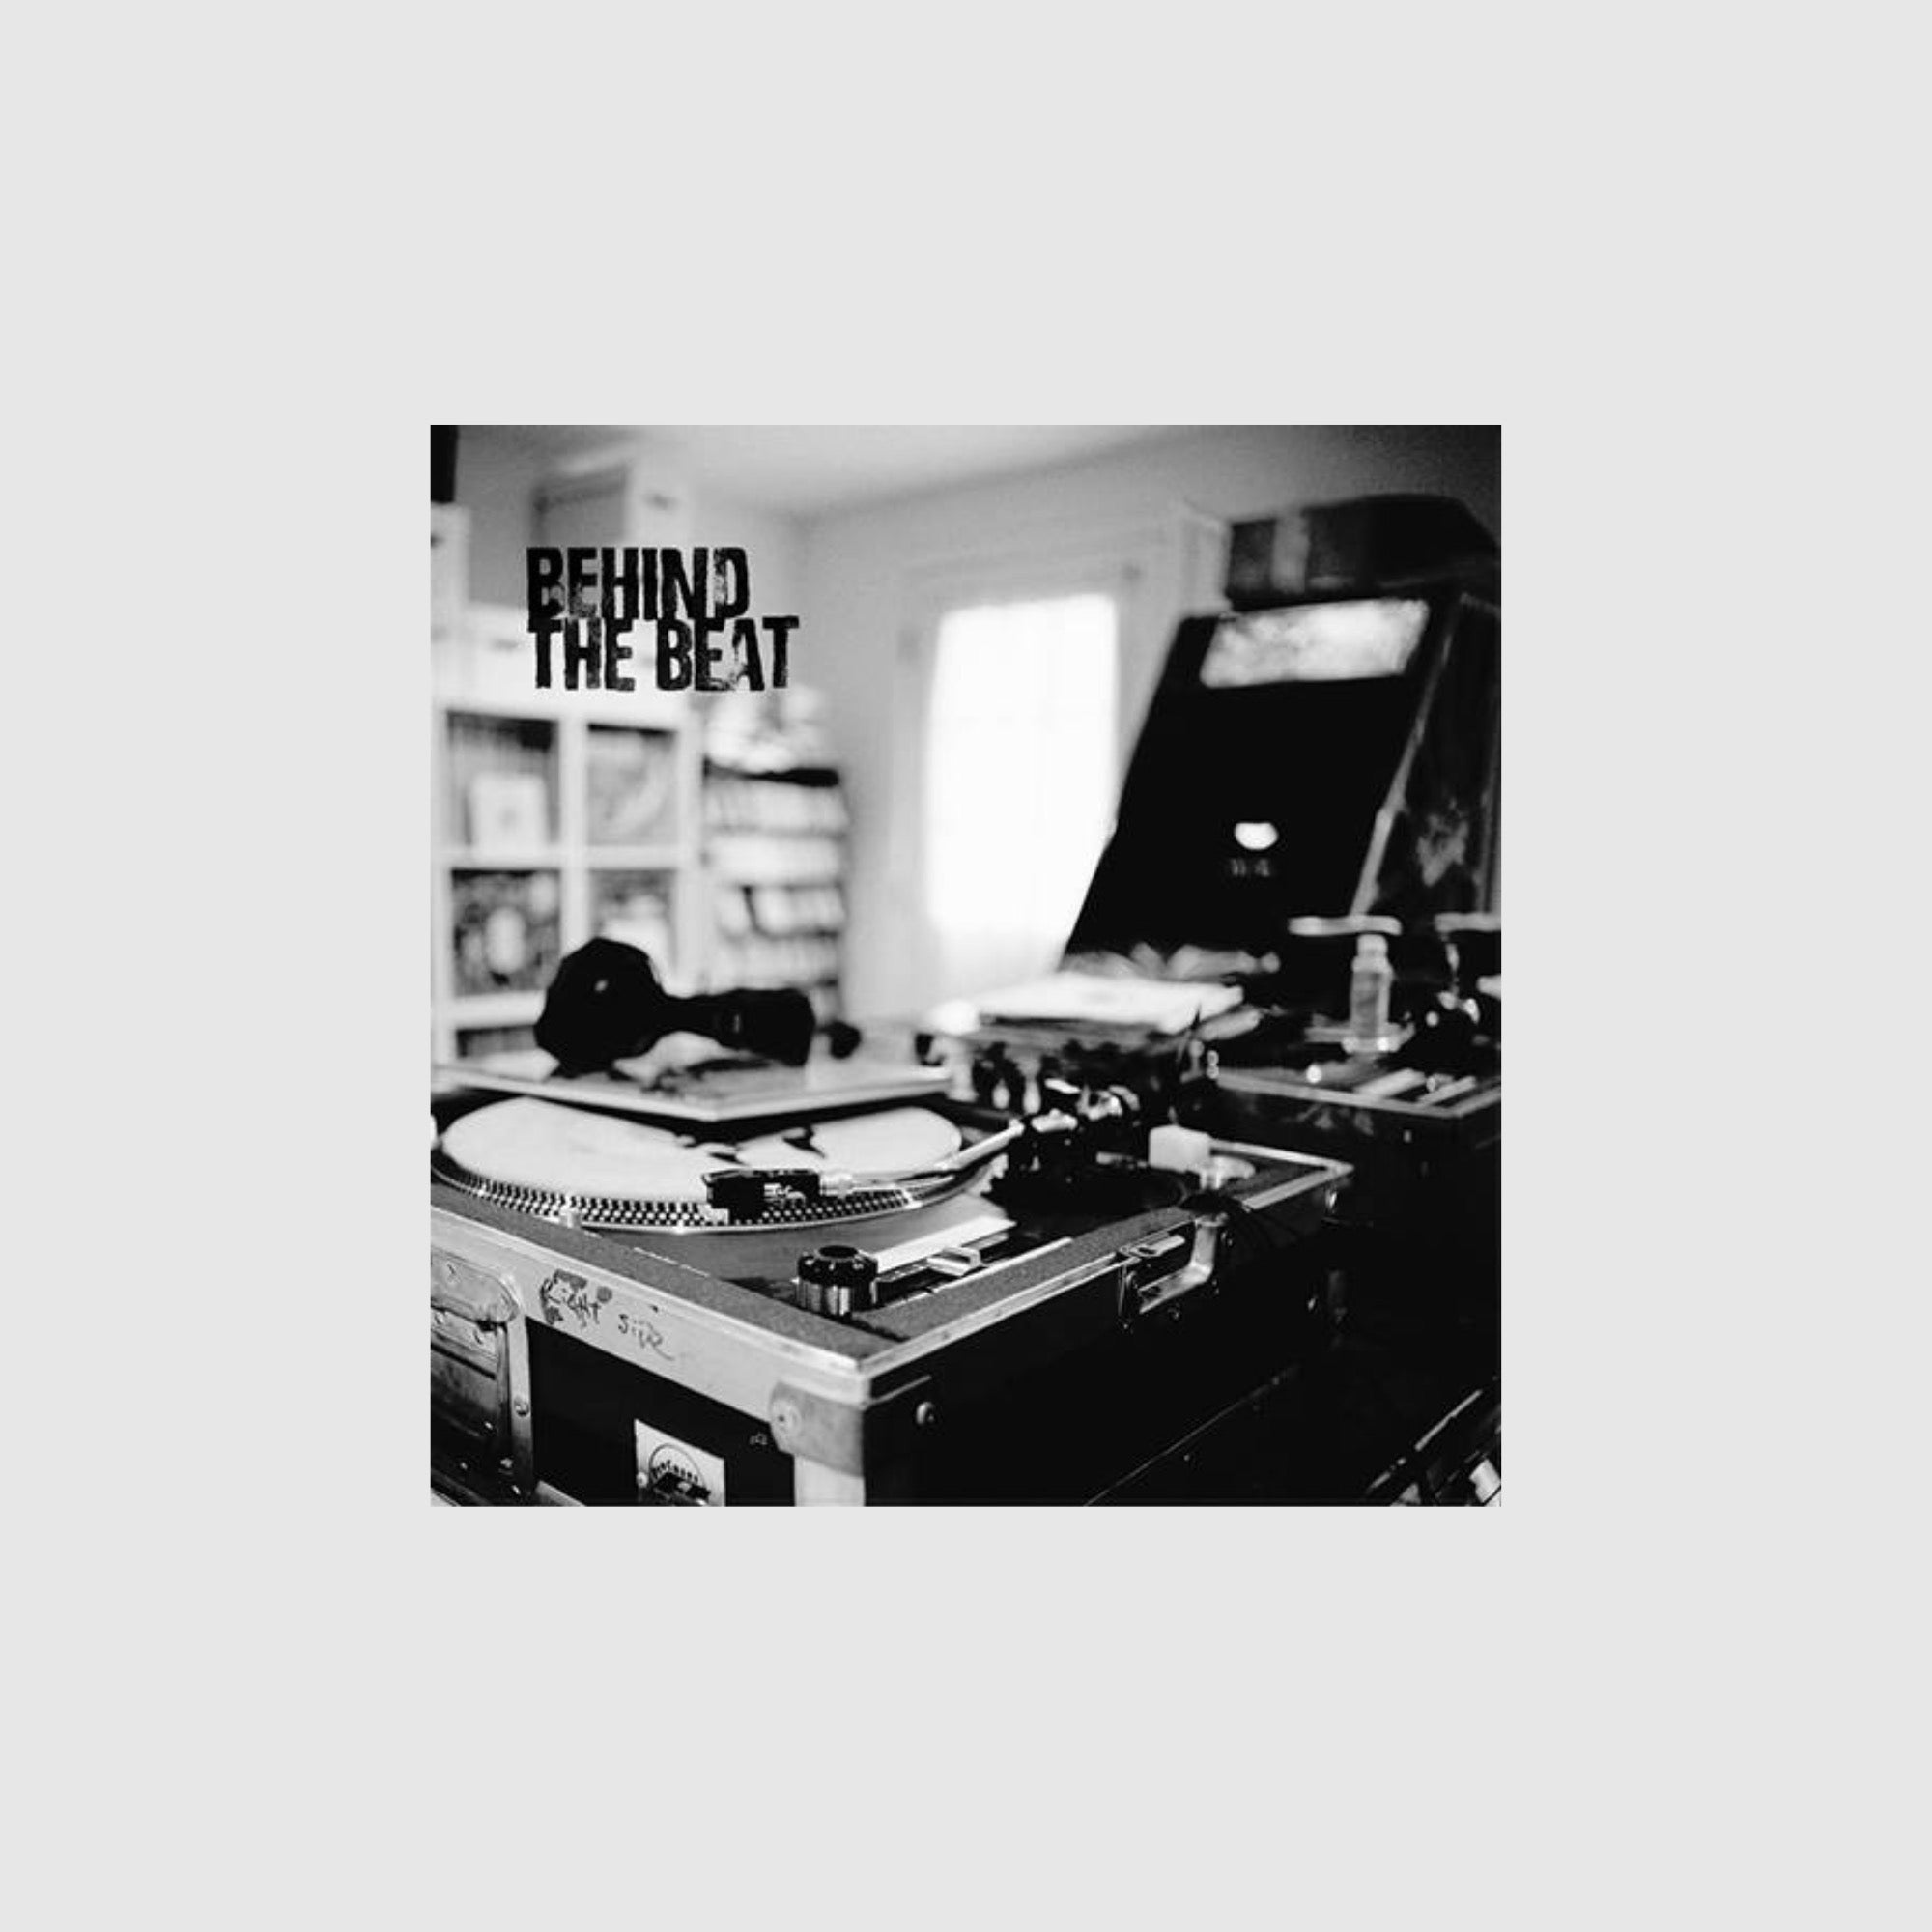 Gritty black and white photo of a turntable and vinyl collection, 'Behind The Beat' graffiti text.